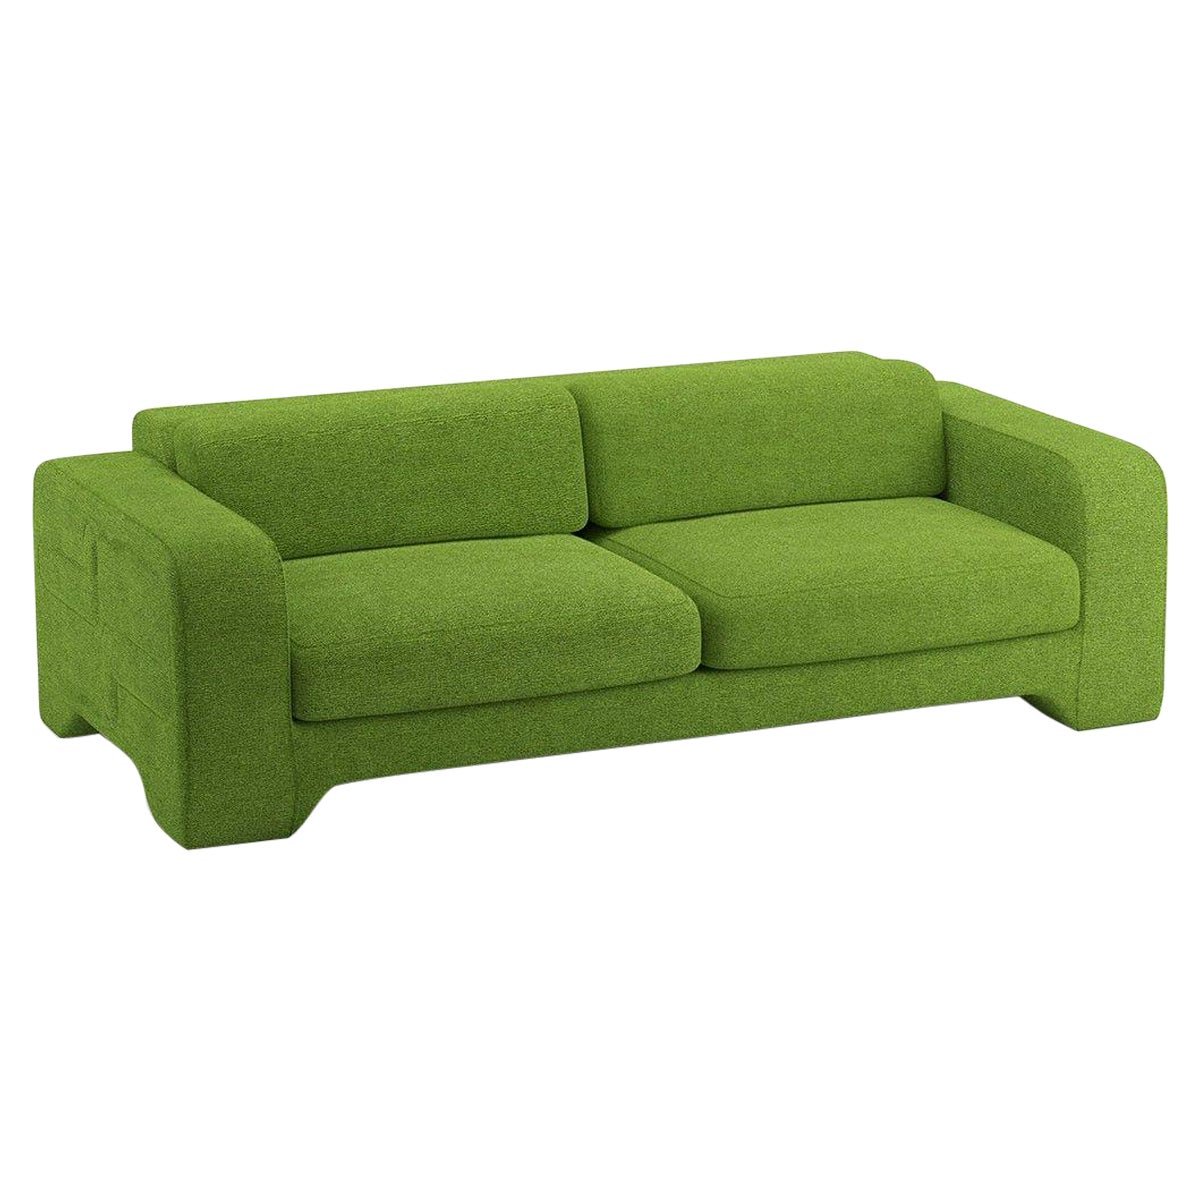 \Popus Editions Giovanna 3 Seater Sofa in Grass Megeve Fabric with Knit Effect For Sale